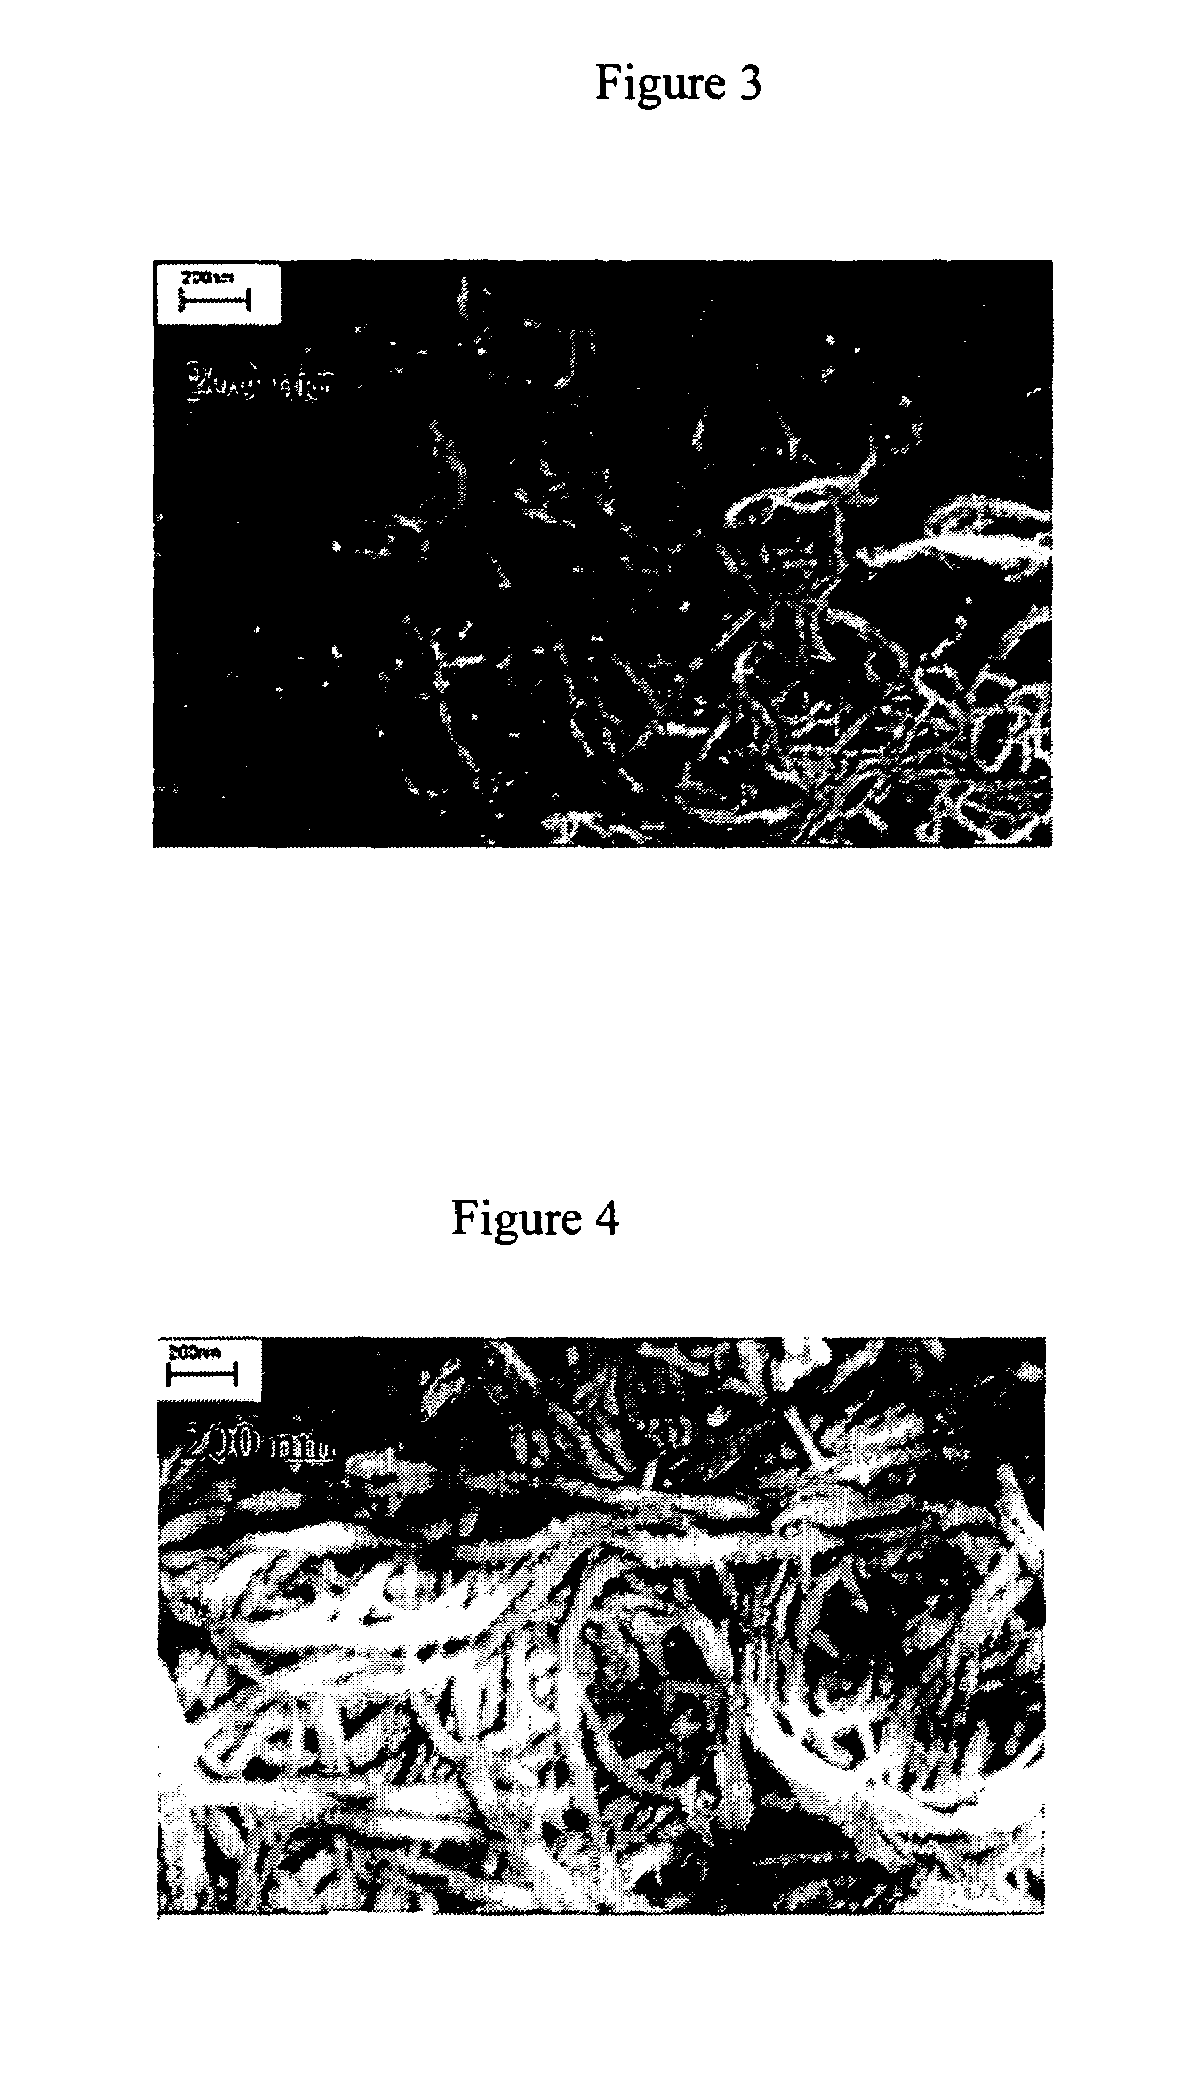 Supercapacitor having electrode material comprising single-wall carbon nanotubes and process for making the same